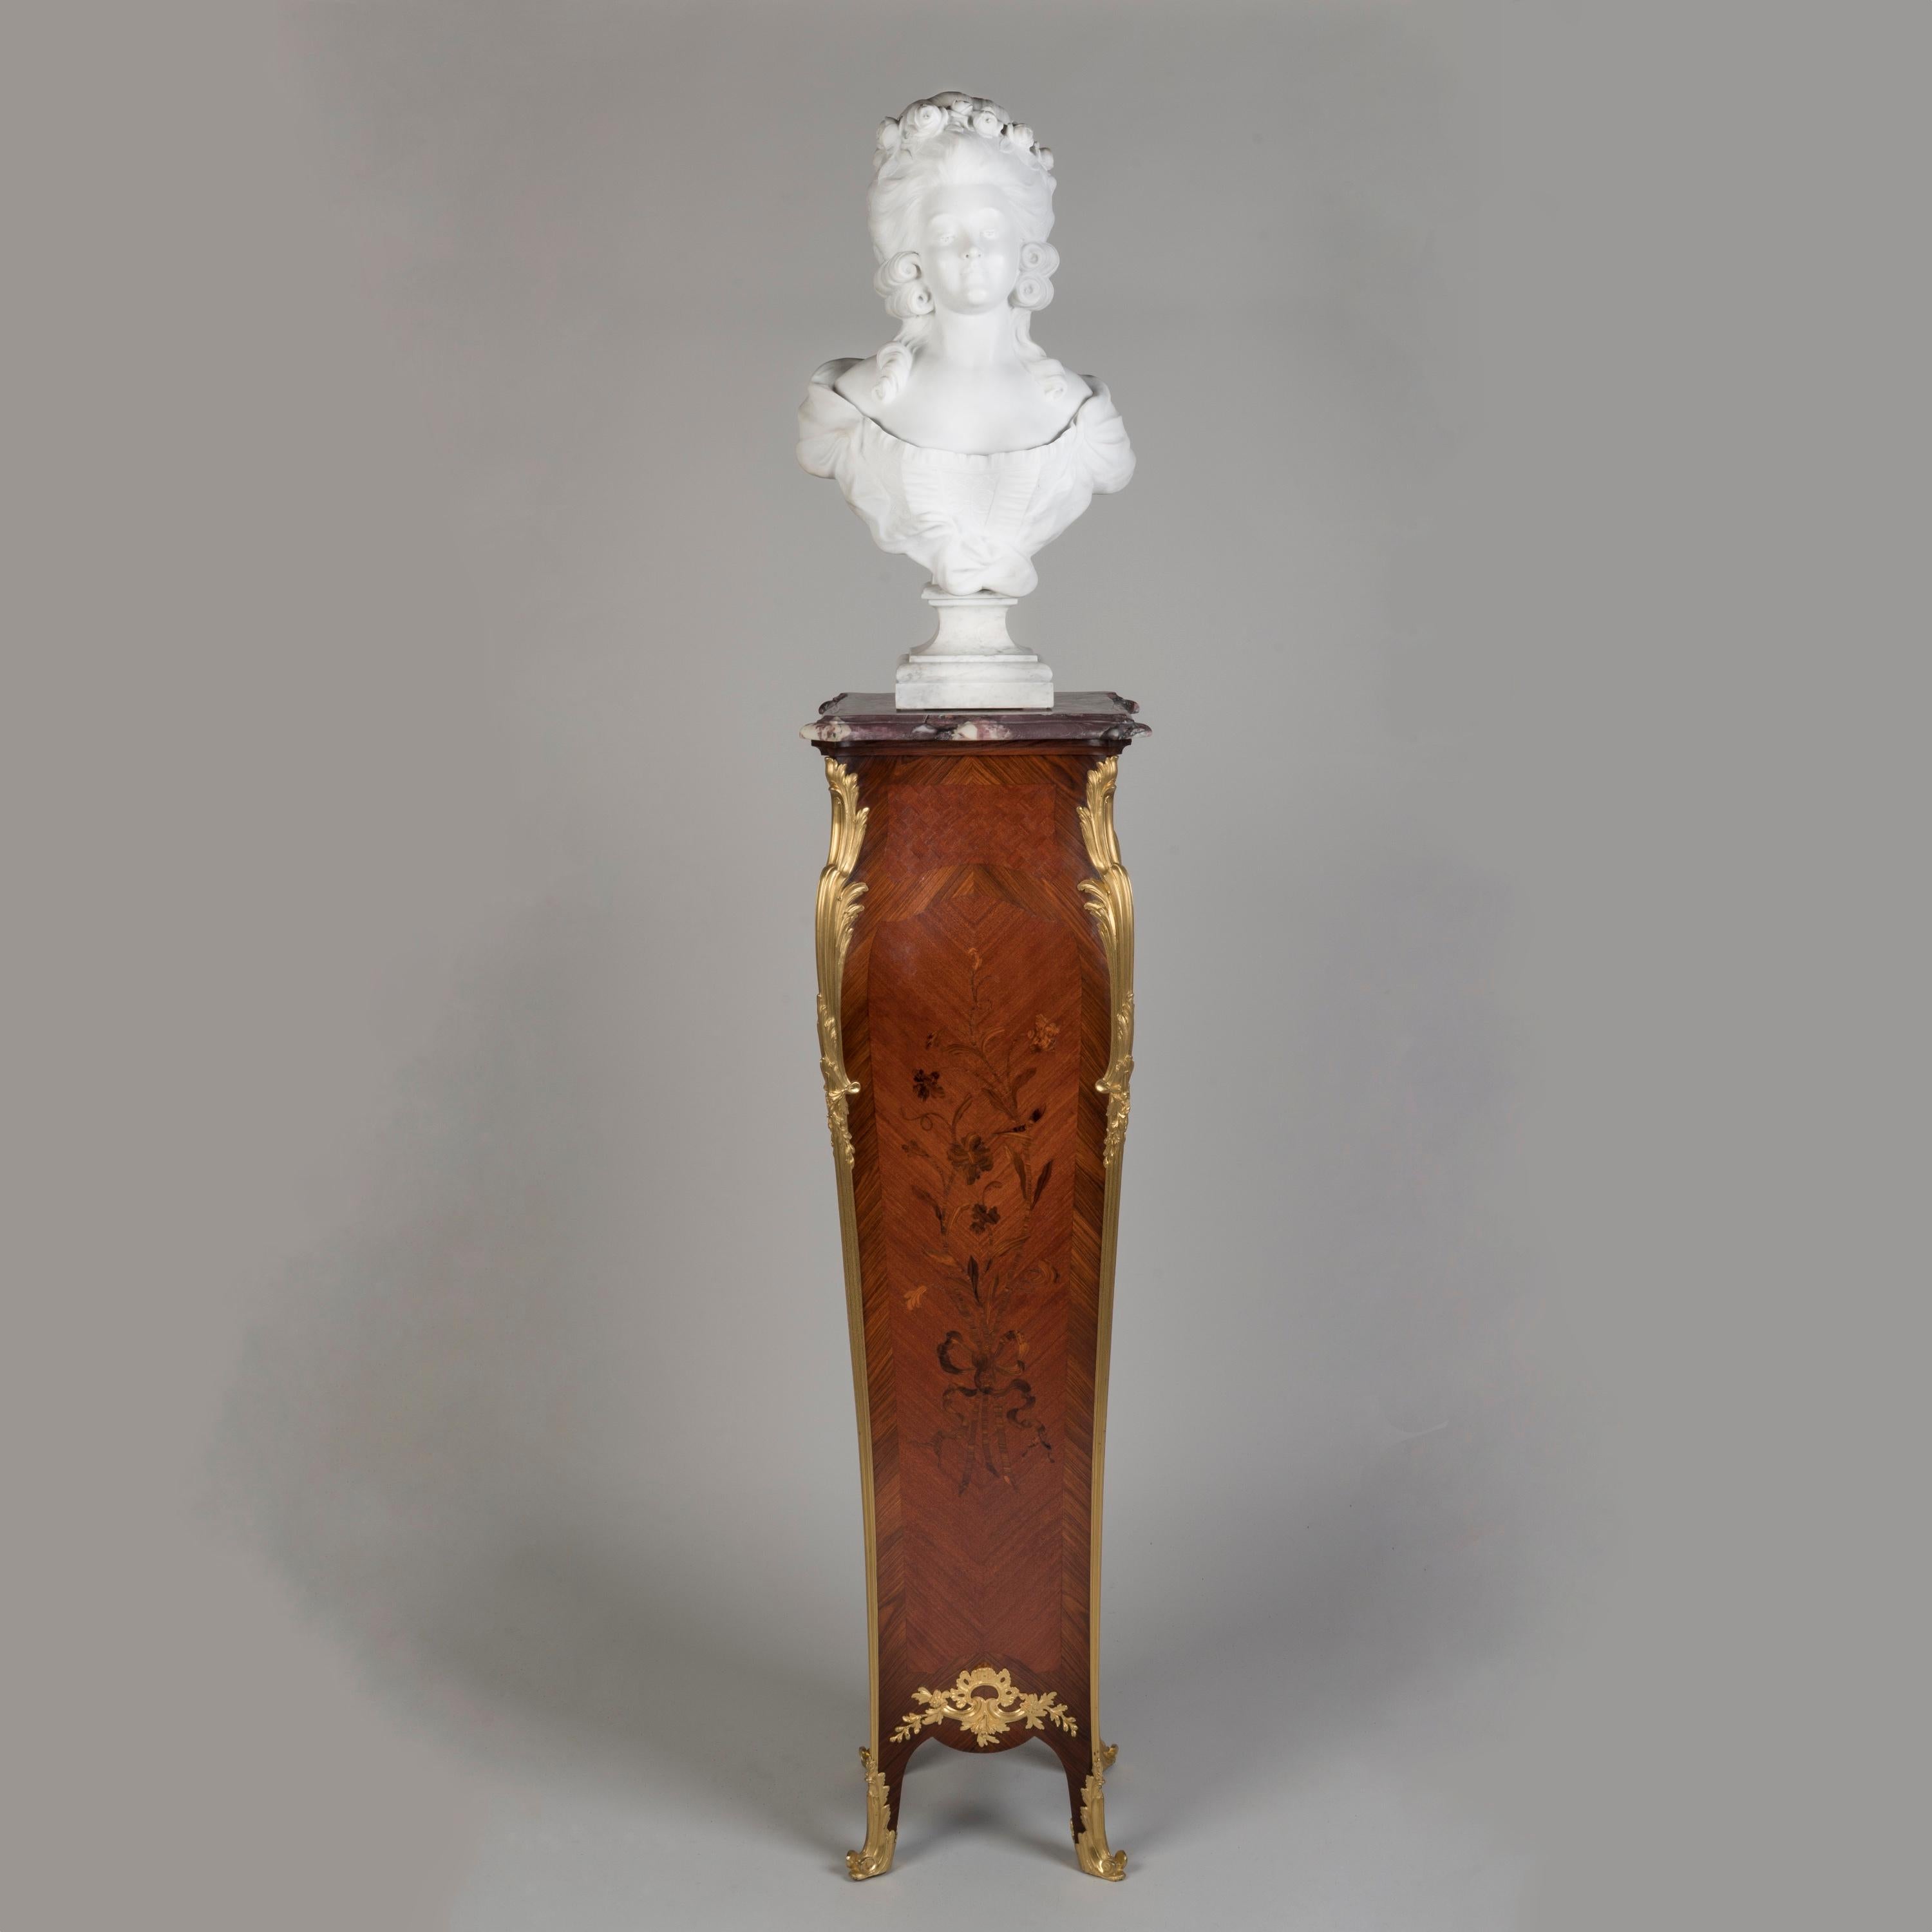 An Elegant Marquetry Pedestal
By Maison Millet of Paris

Of elegant bombé form with bookmatched kingwood crossbanding and a bois de bout floral marquetry panel on a bois satiné ground, the corners dressed with acanthus ormolu mounts terminating